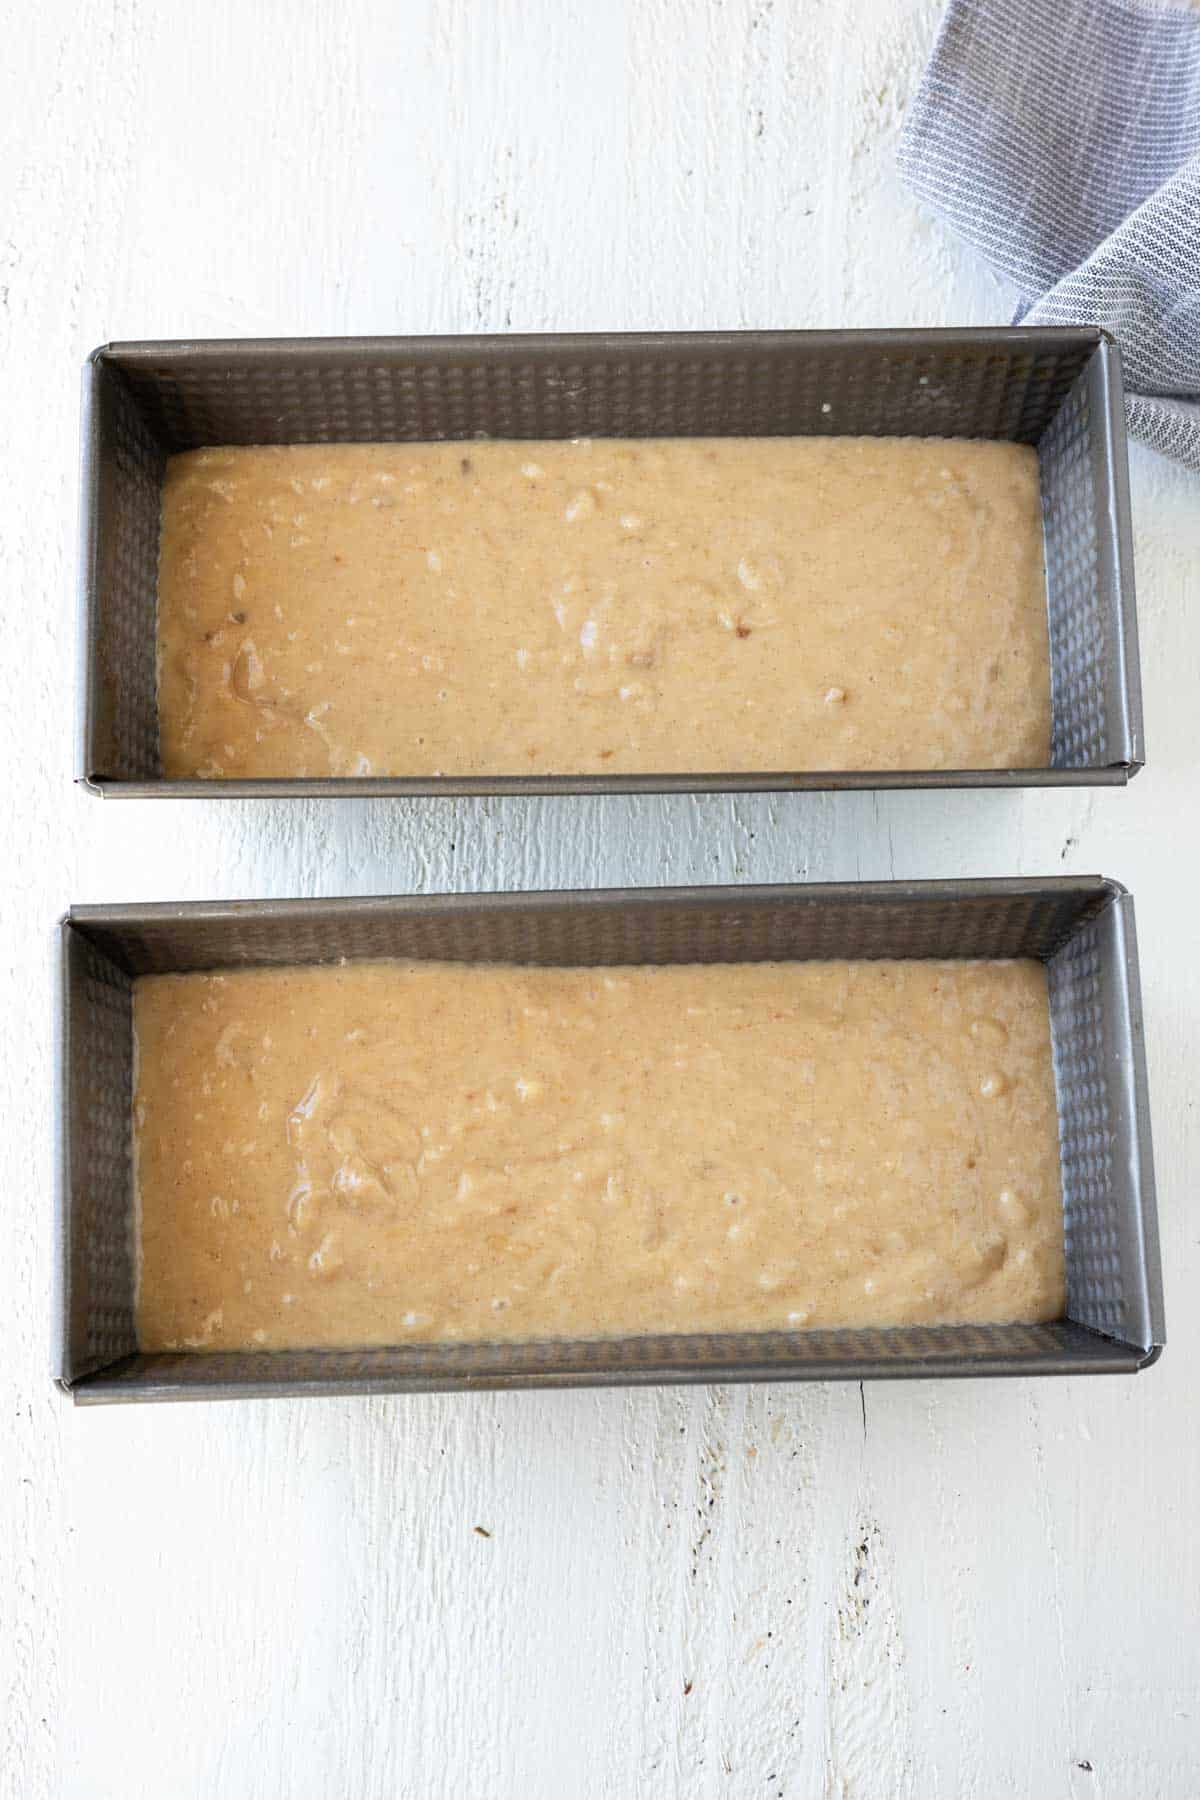 Two loaves of banana bread batter in bread pans.